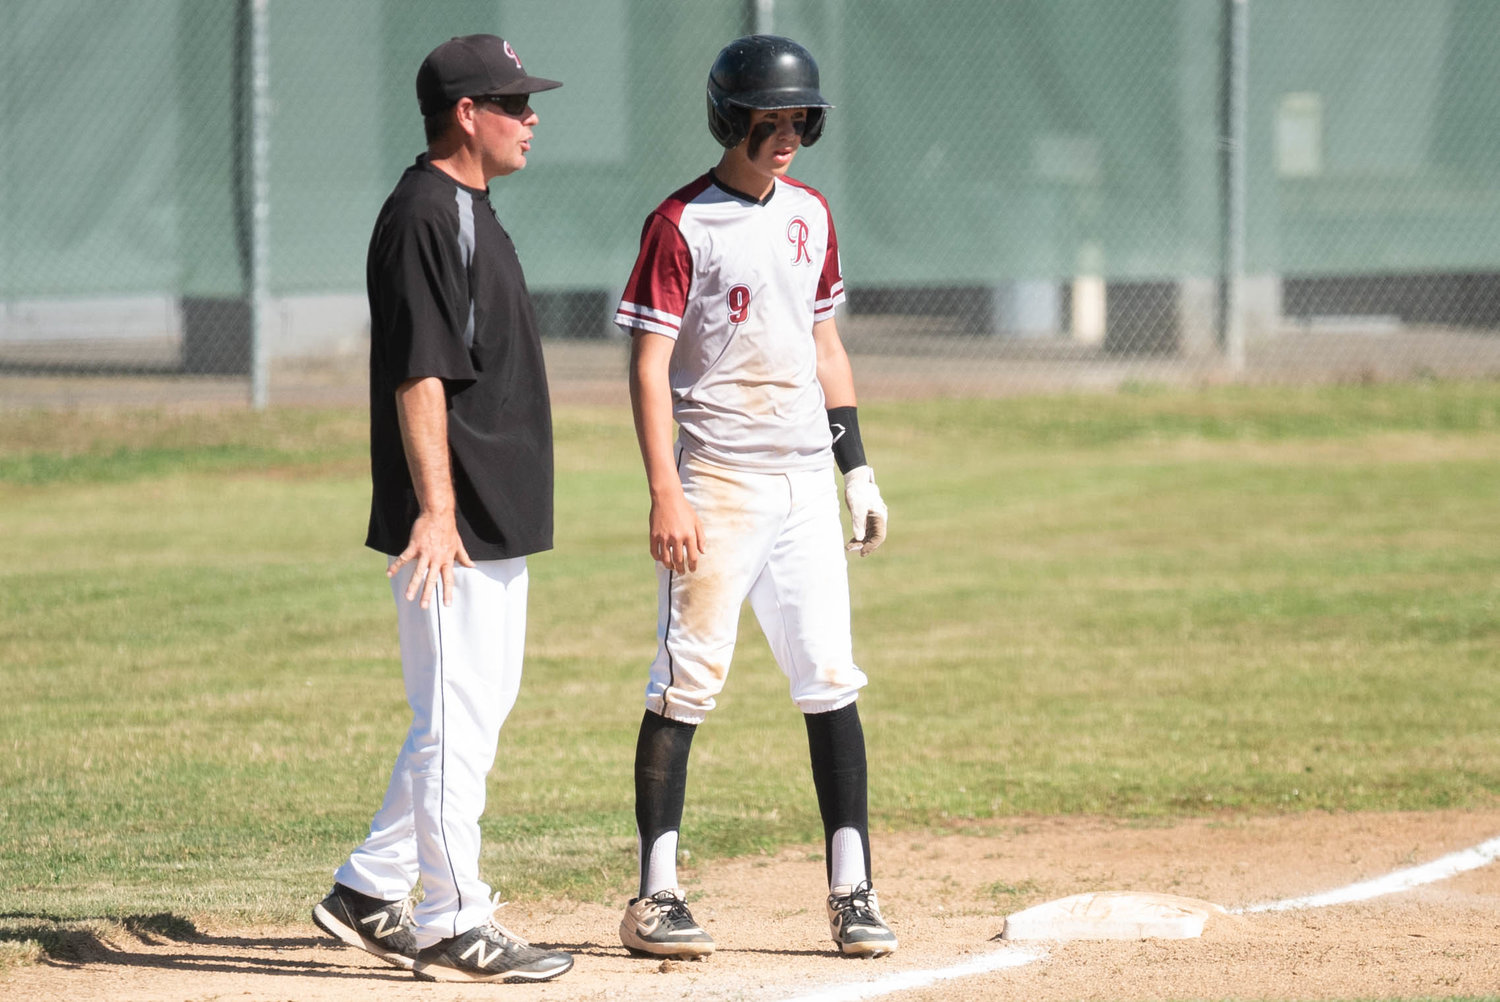 I-5 Jeep Renegades infielder Cal Bullock is counseled by his father and coach, Bryan, on the basepath against the Tenino Trappers July 15 in Chehalis.